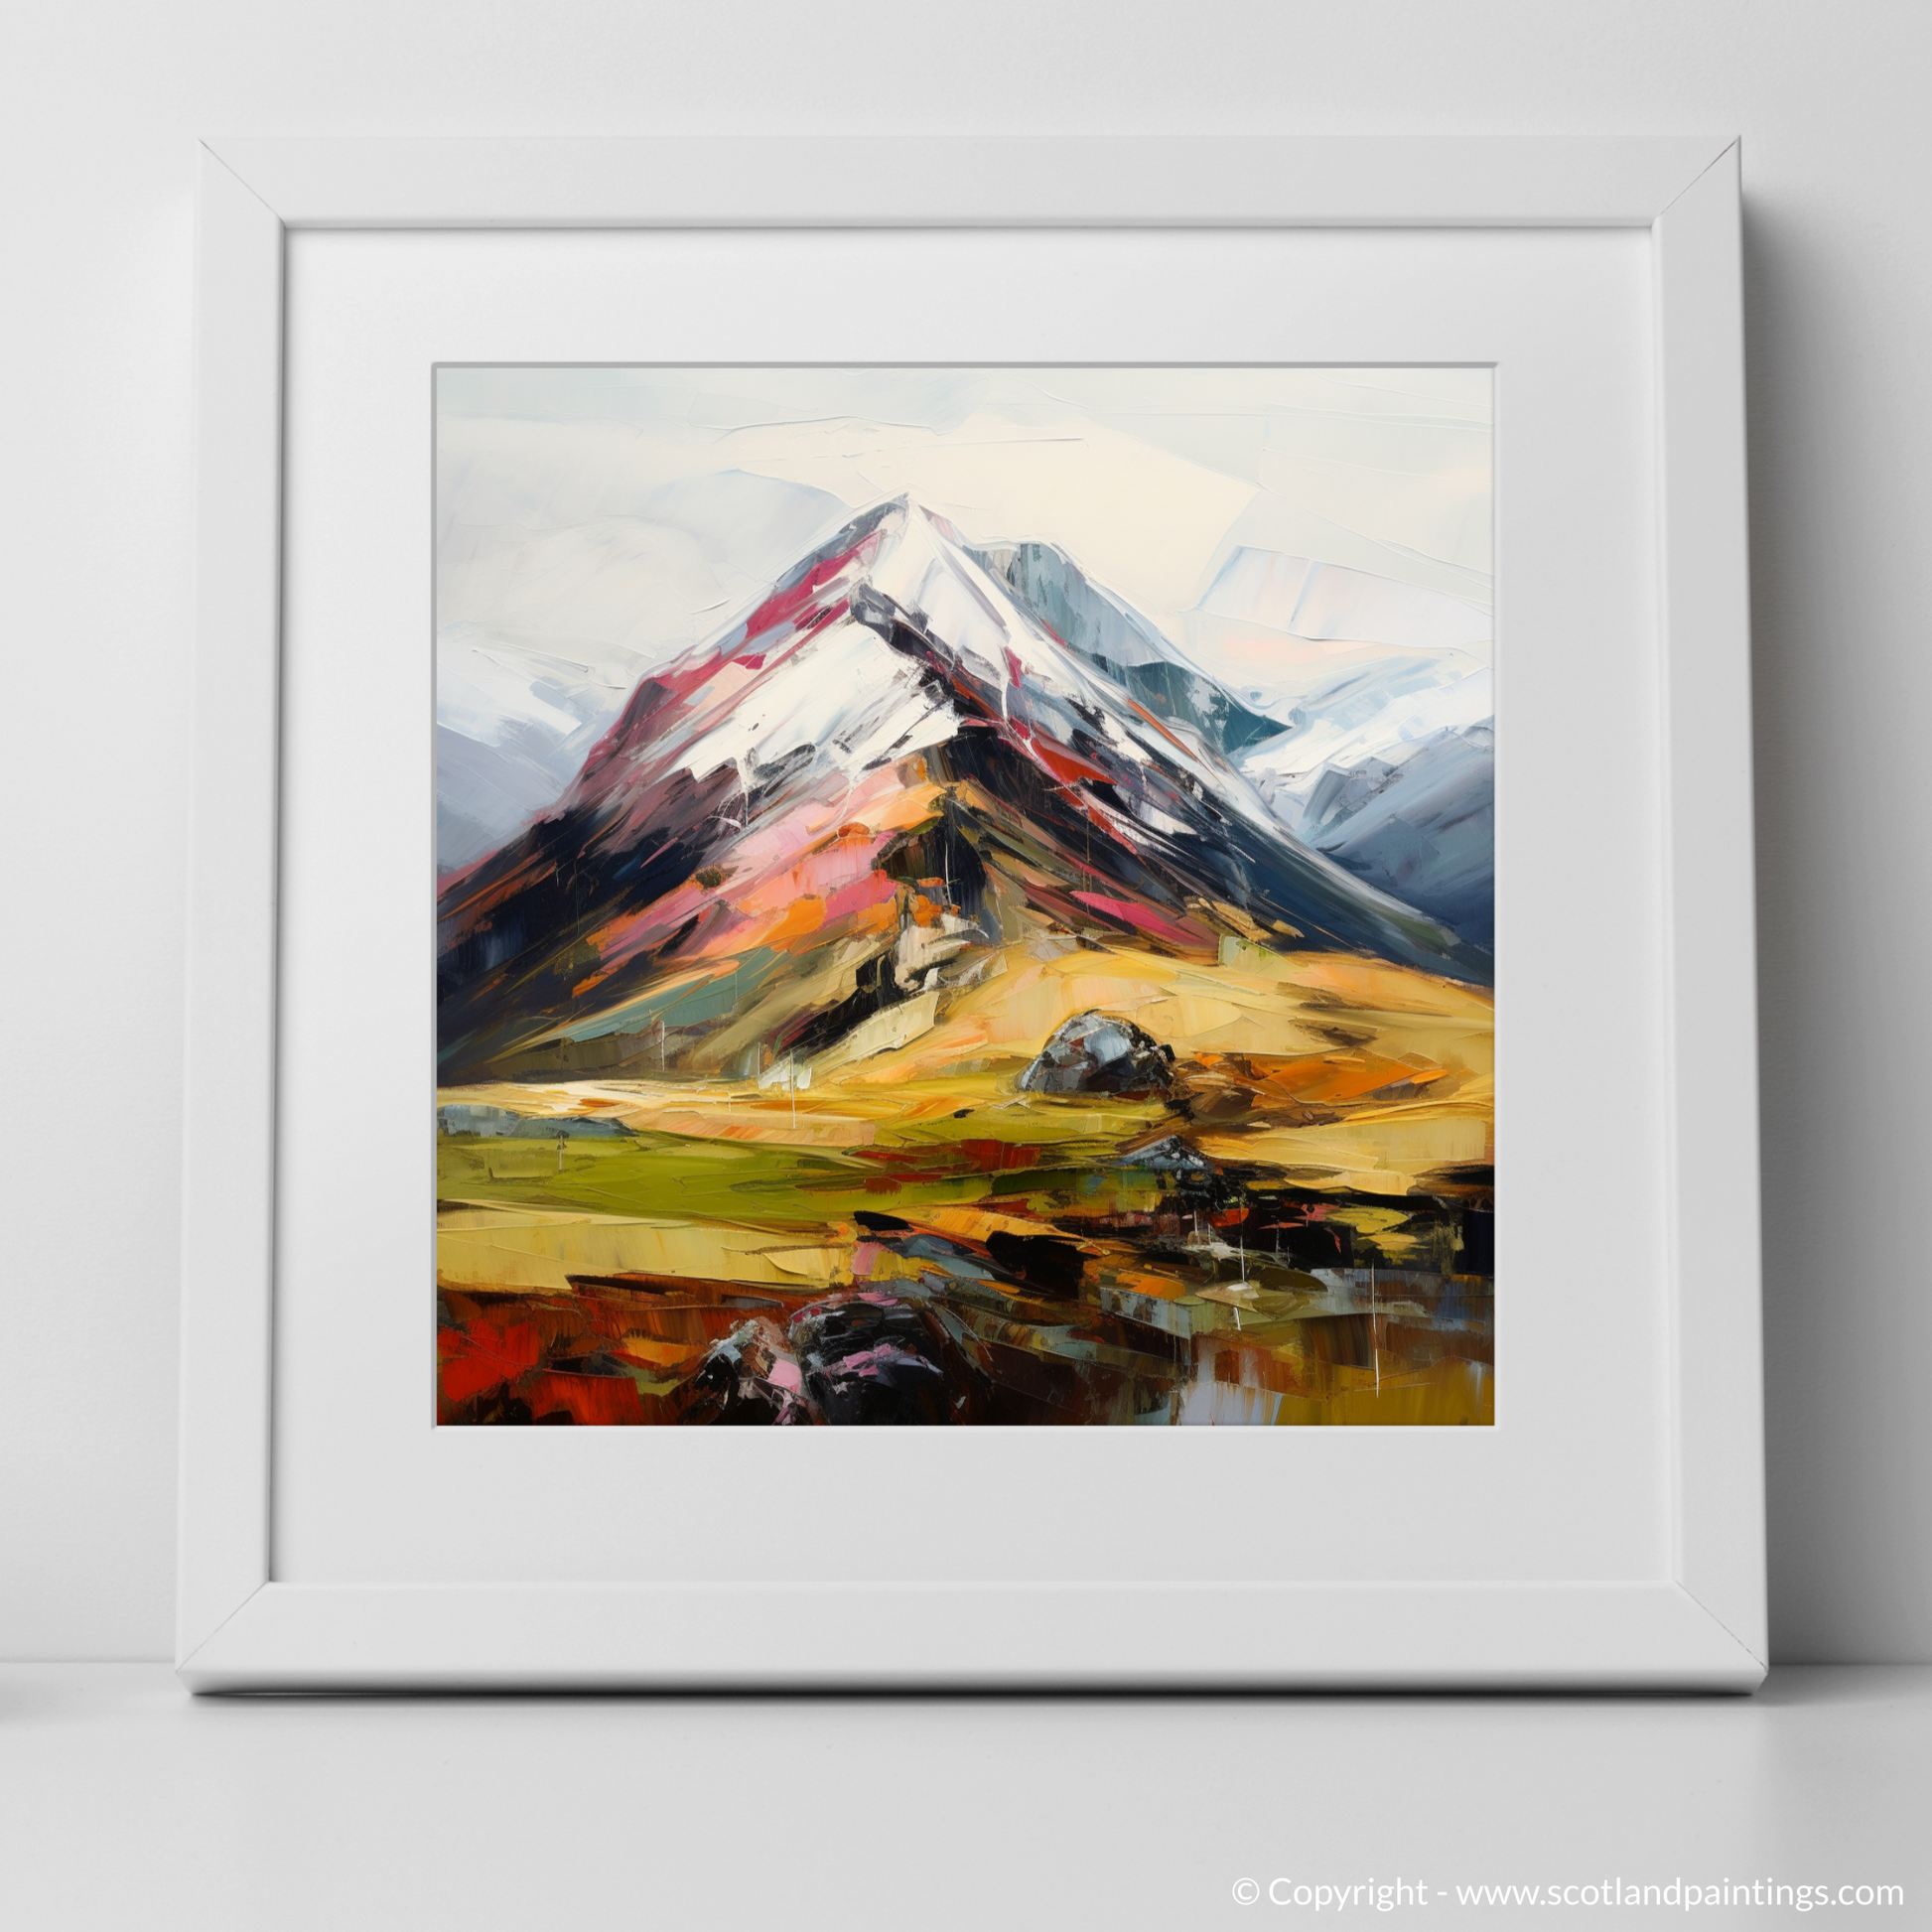 Art Print of Meall Garbh (Ben Lawers) with a white frame